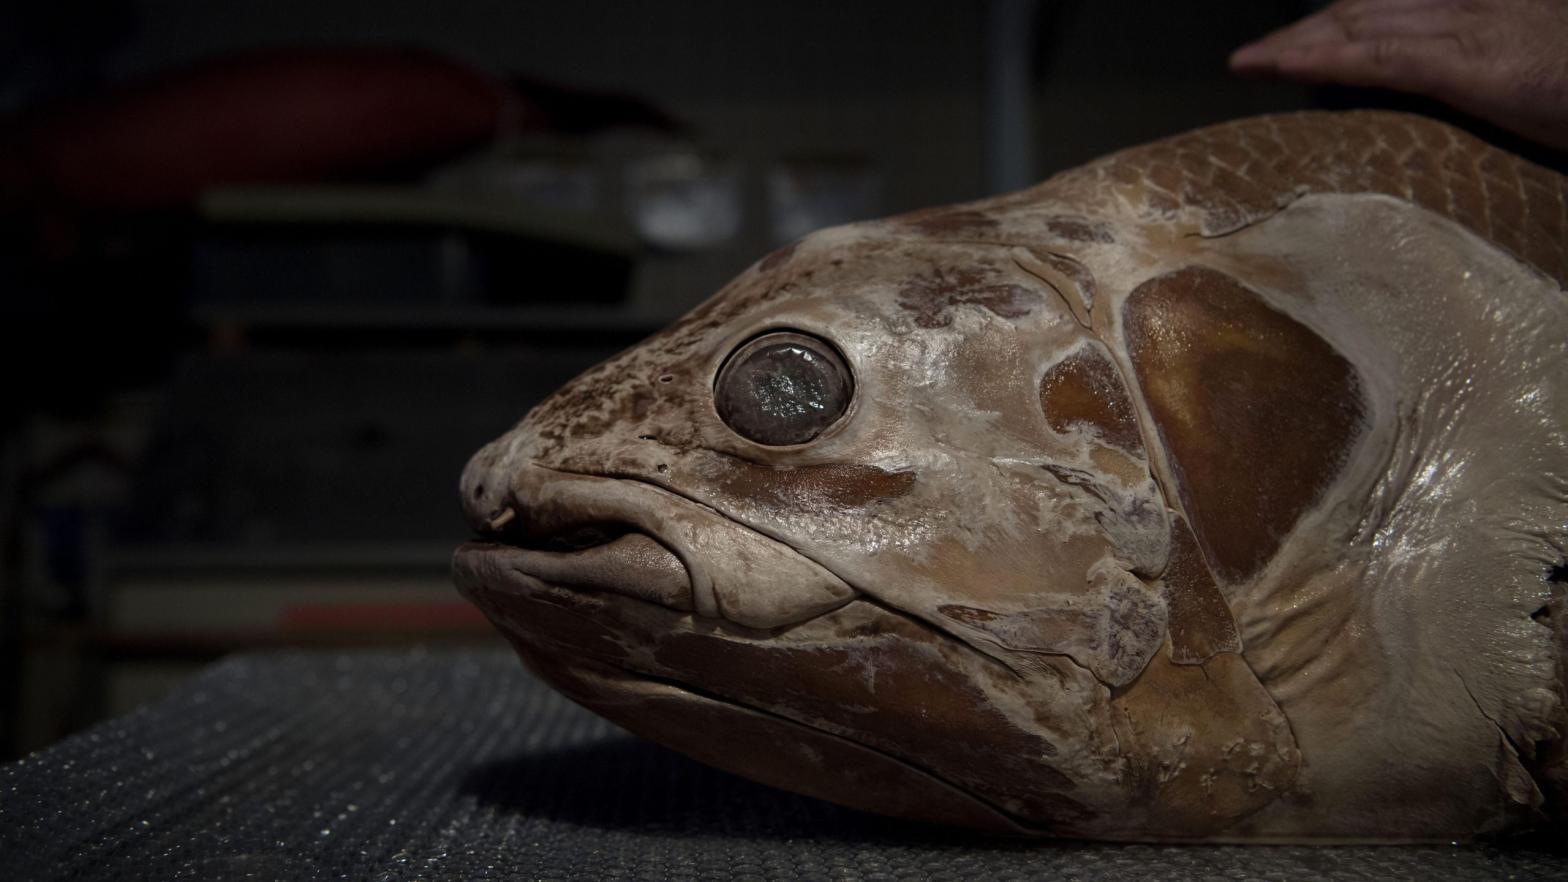 A coelacanth from Paris' Museum d'Histoire Naturelle, from which the team sourced some of its scales. (Photo: CHRISTOPHE ARCHAMBAULT/AFP via Getty Images, Getty Images)